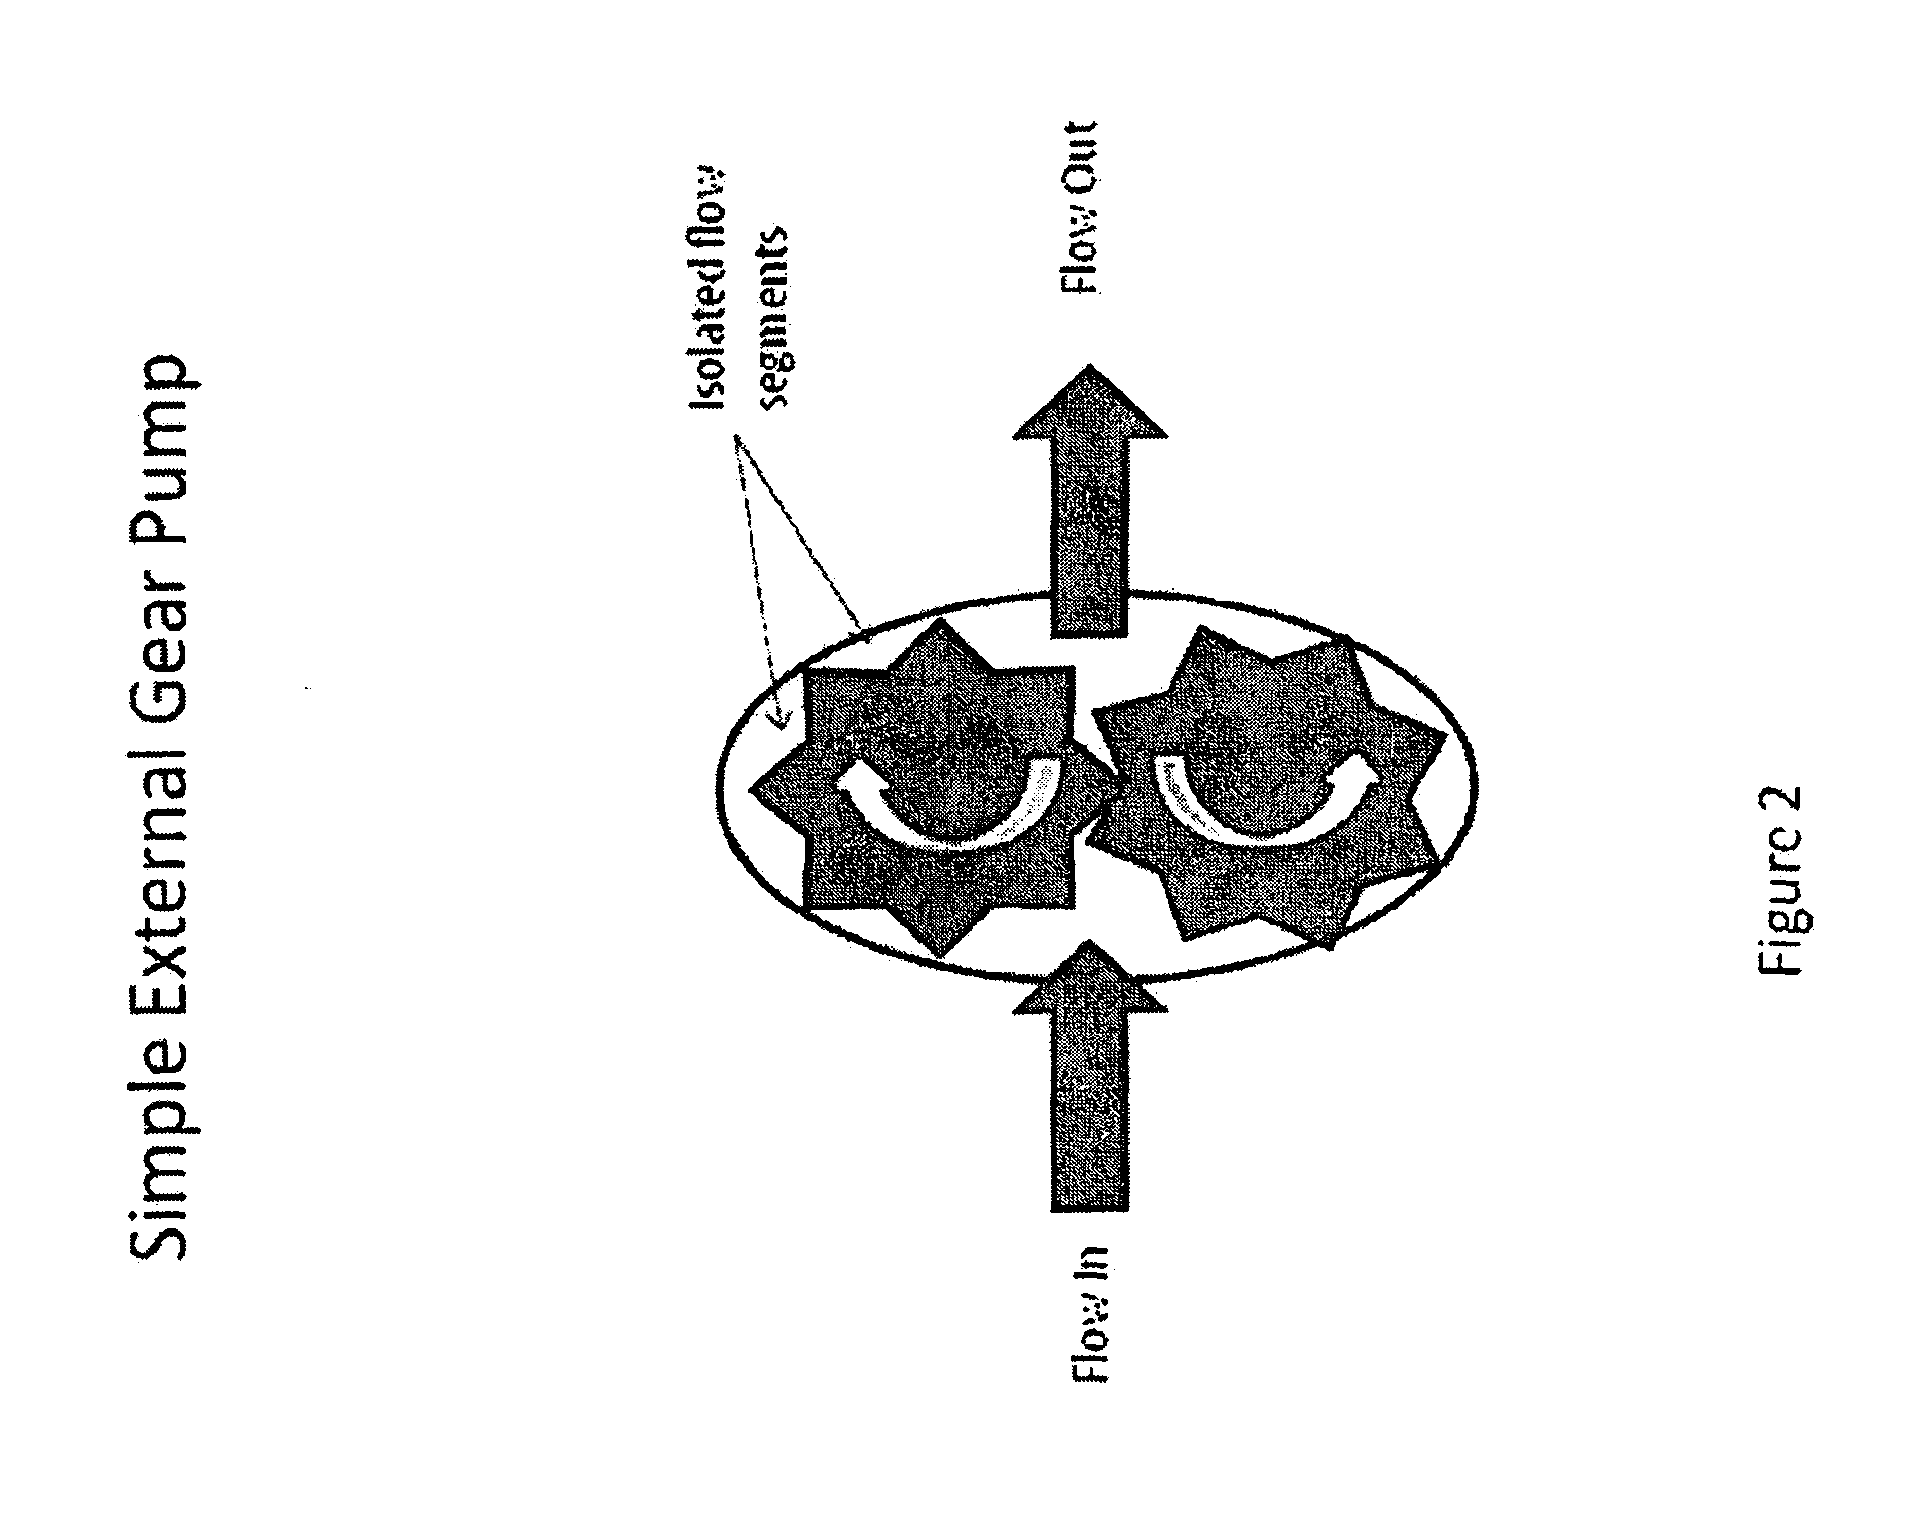 System and process for an active drain for gas-liquid separators